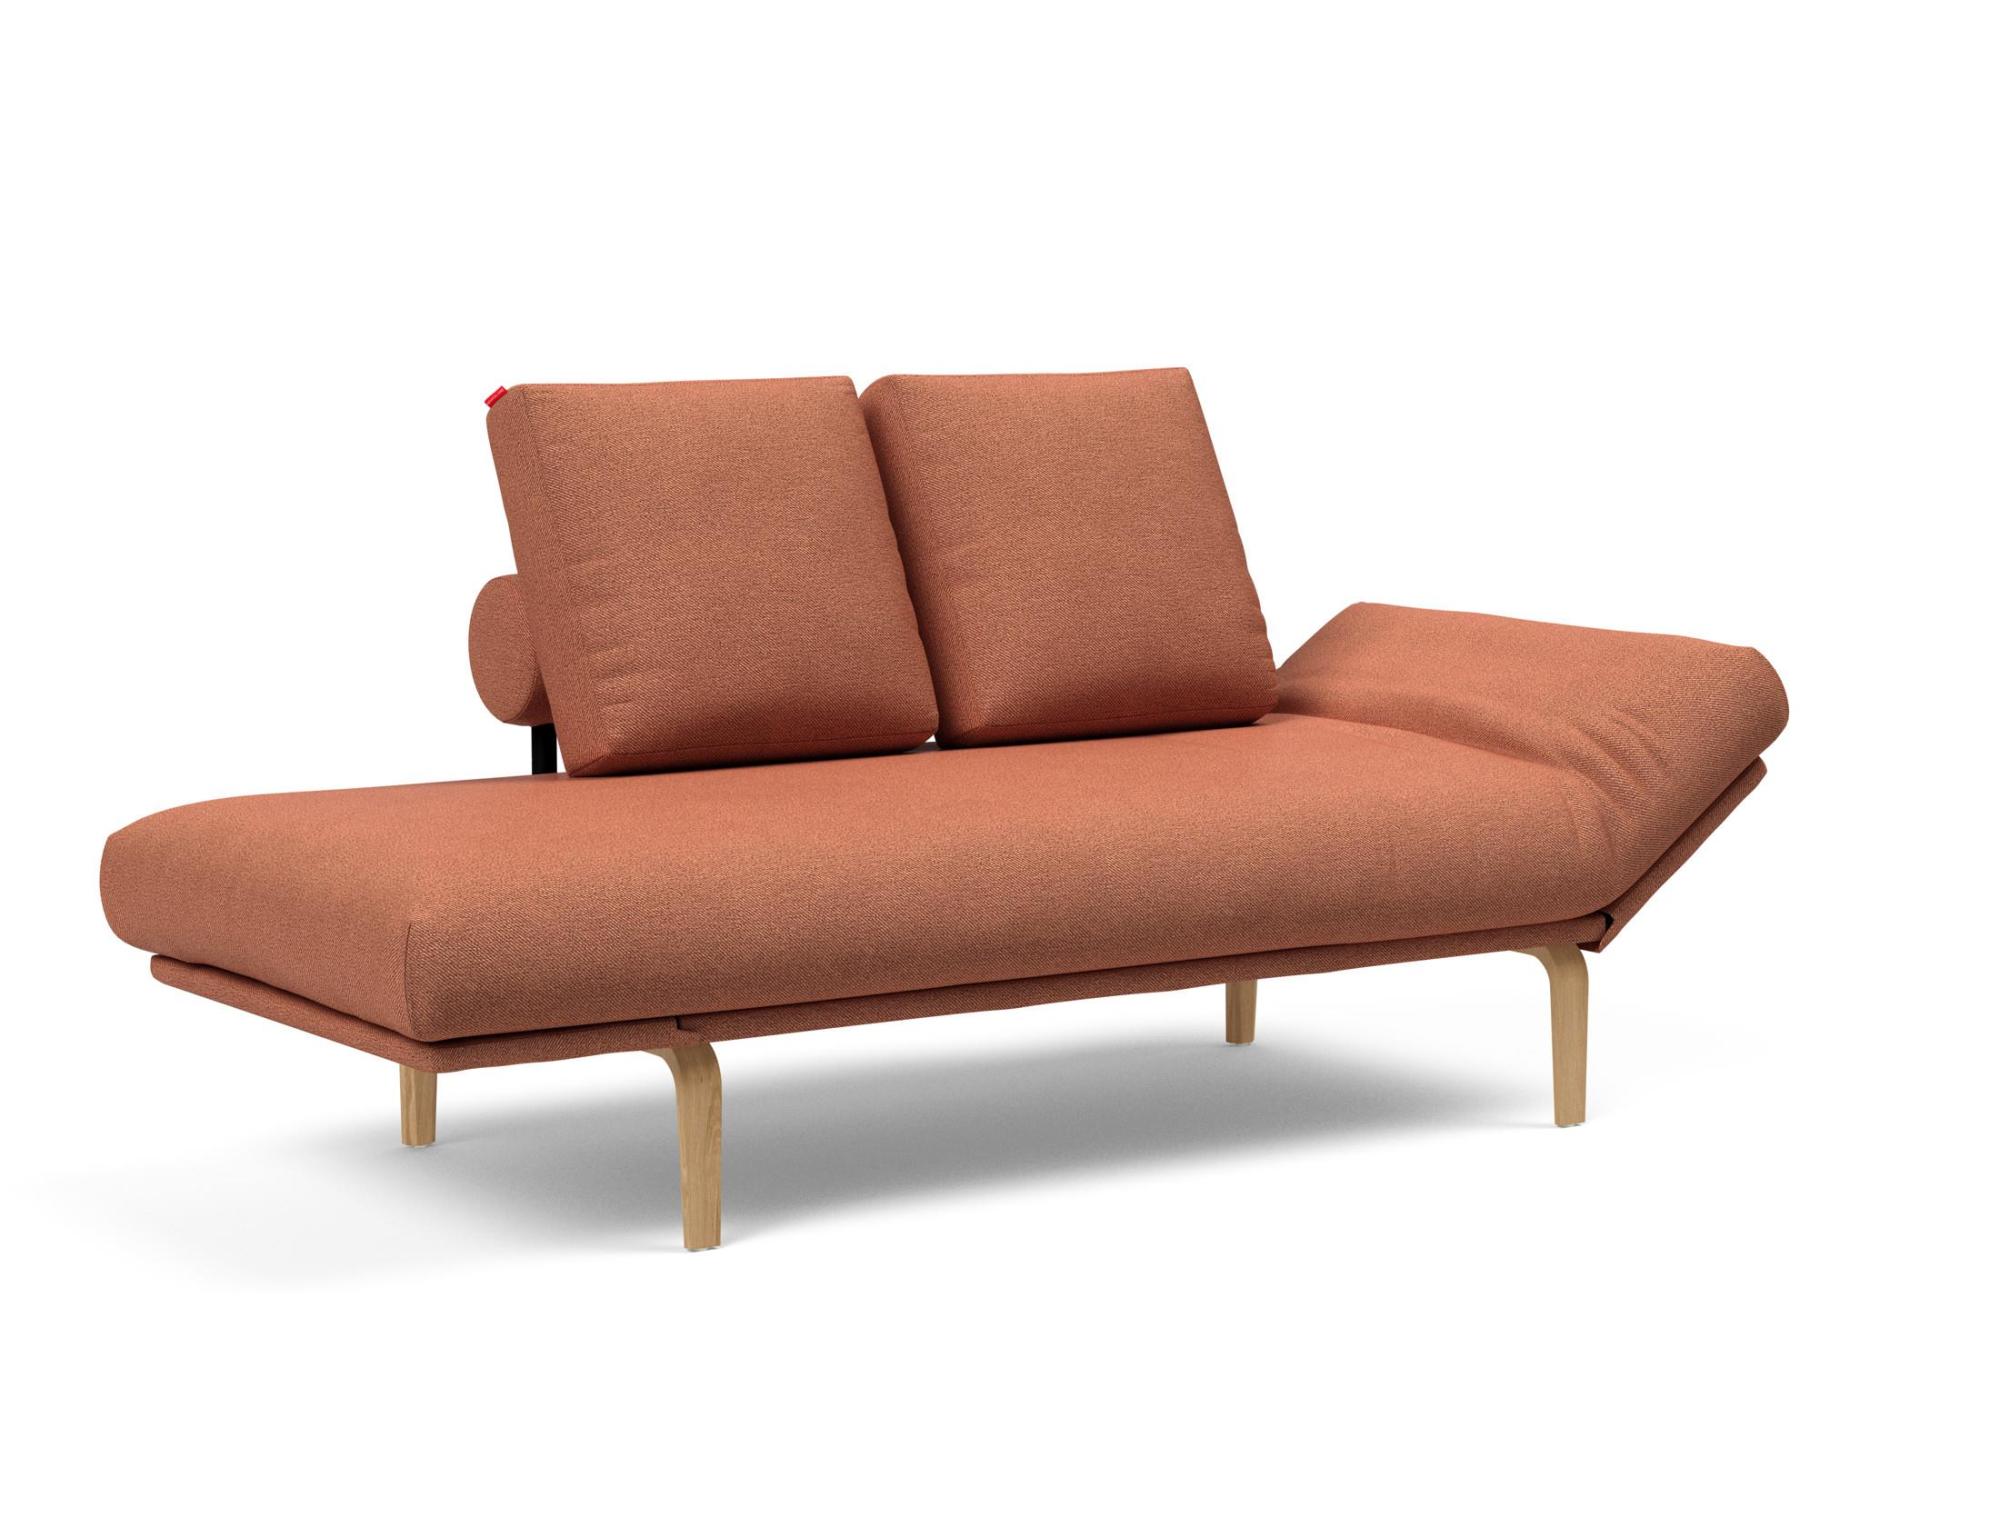 Liege/Daybed Liege/Daybed Rollo Sofas - Innovation